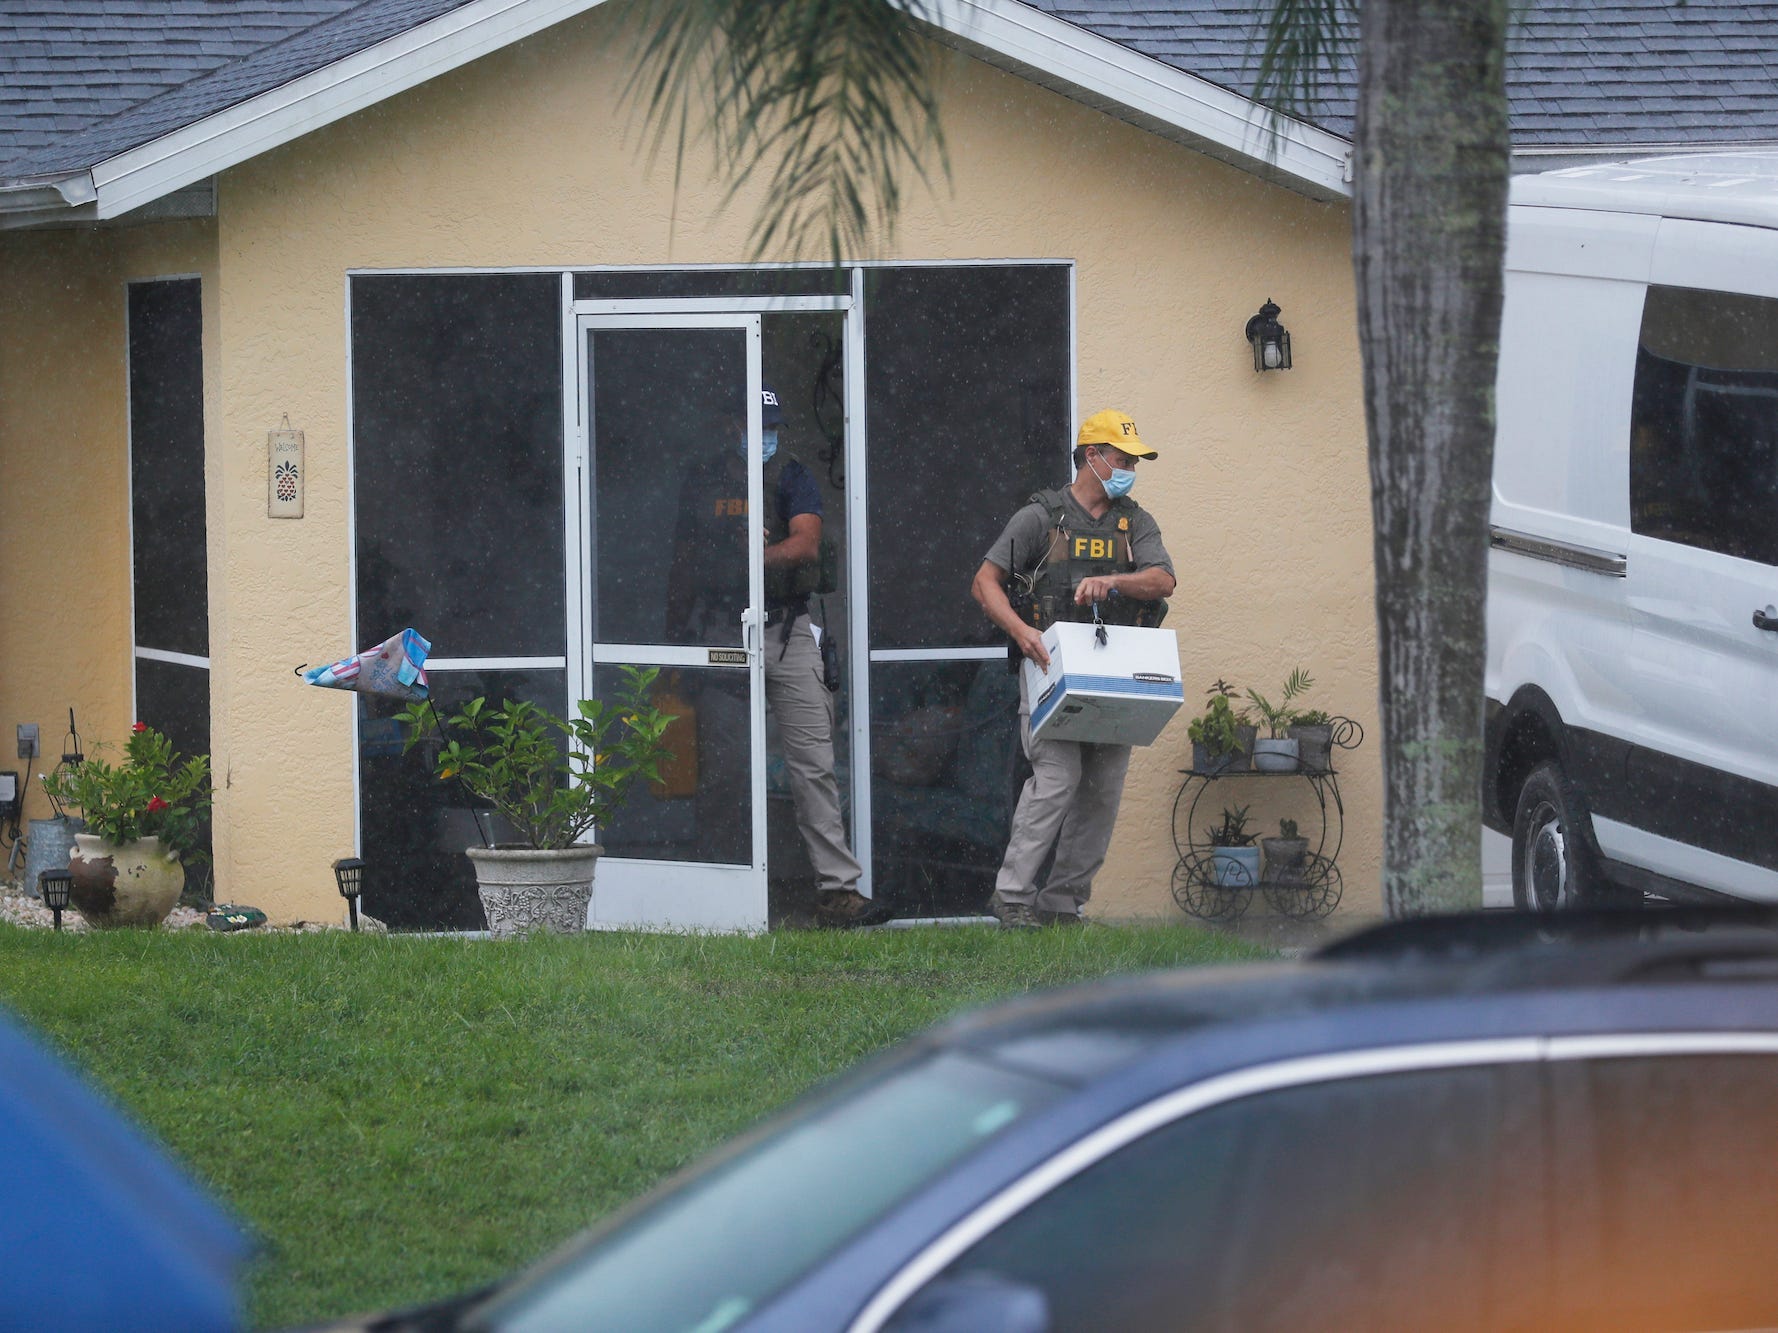 An FBI agent walks out of the door of the house with a box